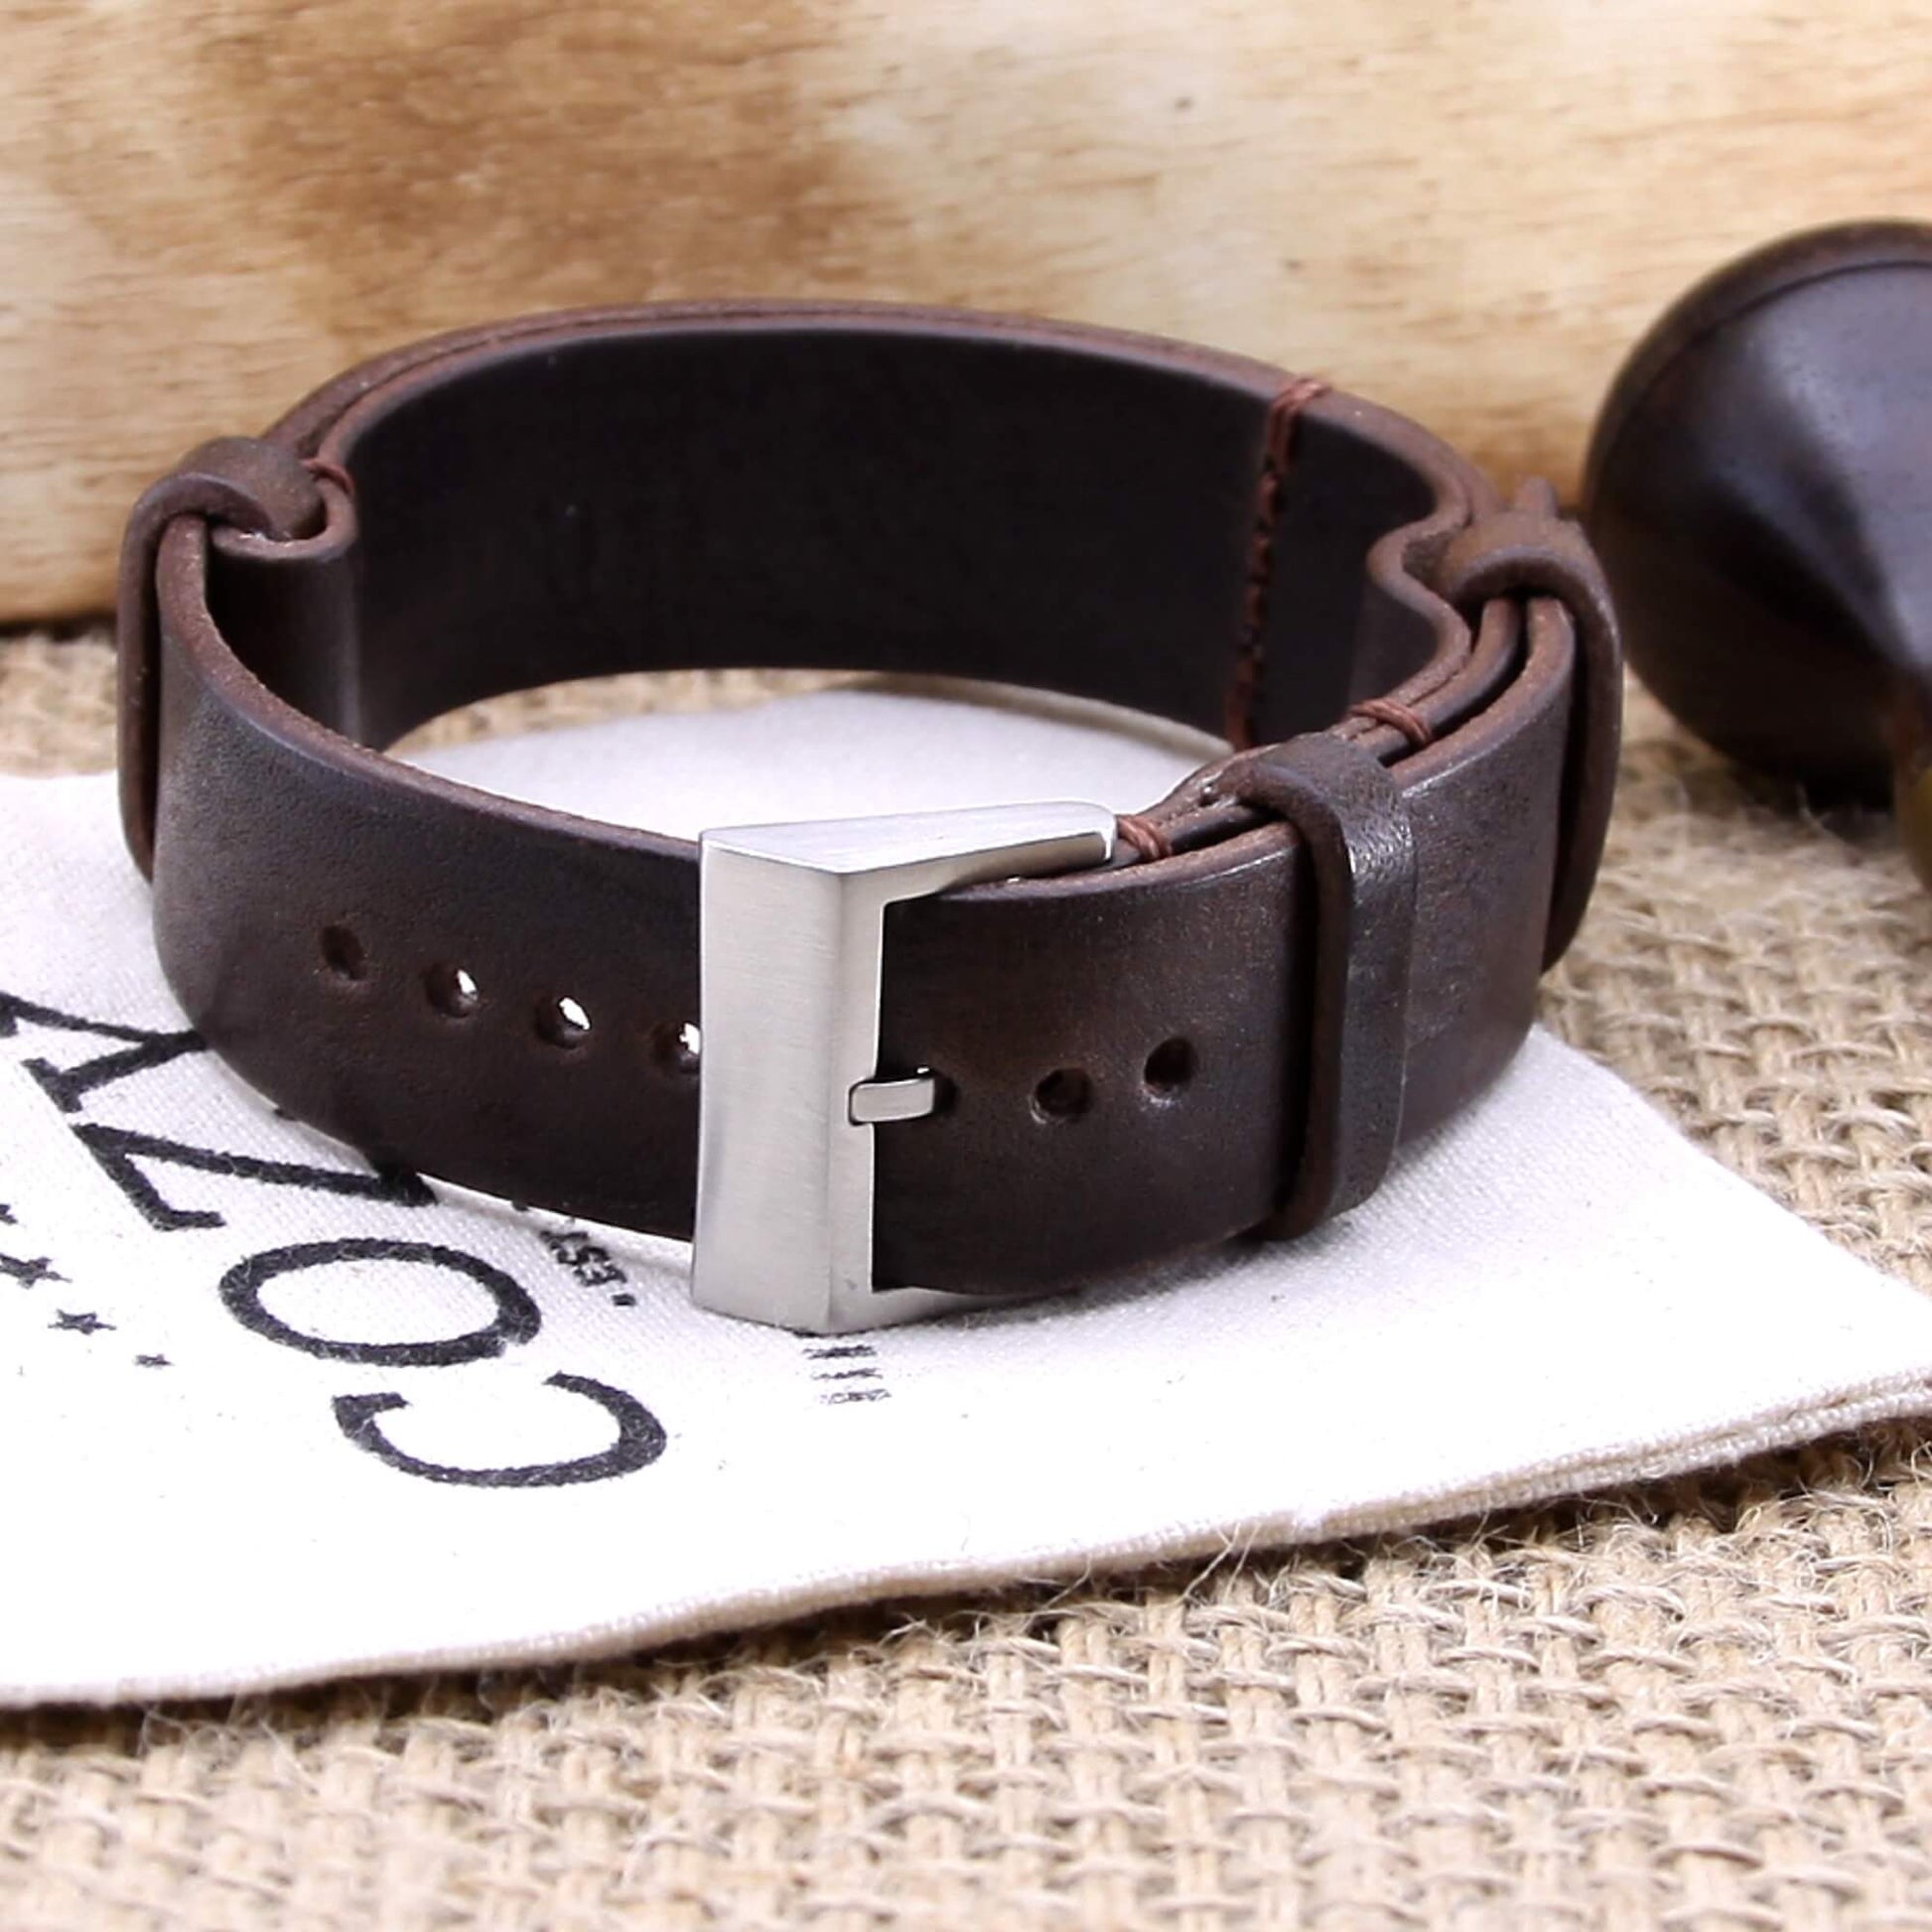 NAT2 Leather Watch Strap, Vintage 406 | Italian Vegetable Tanned Leather | COZY Handmade